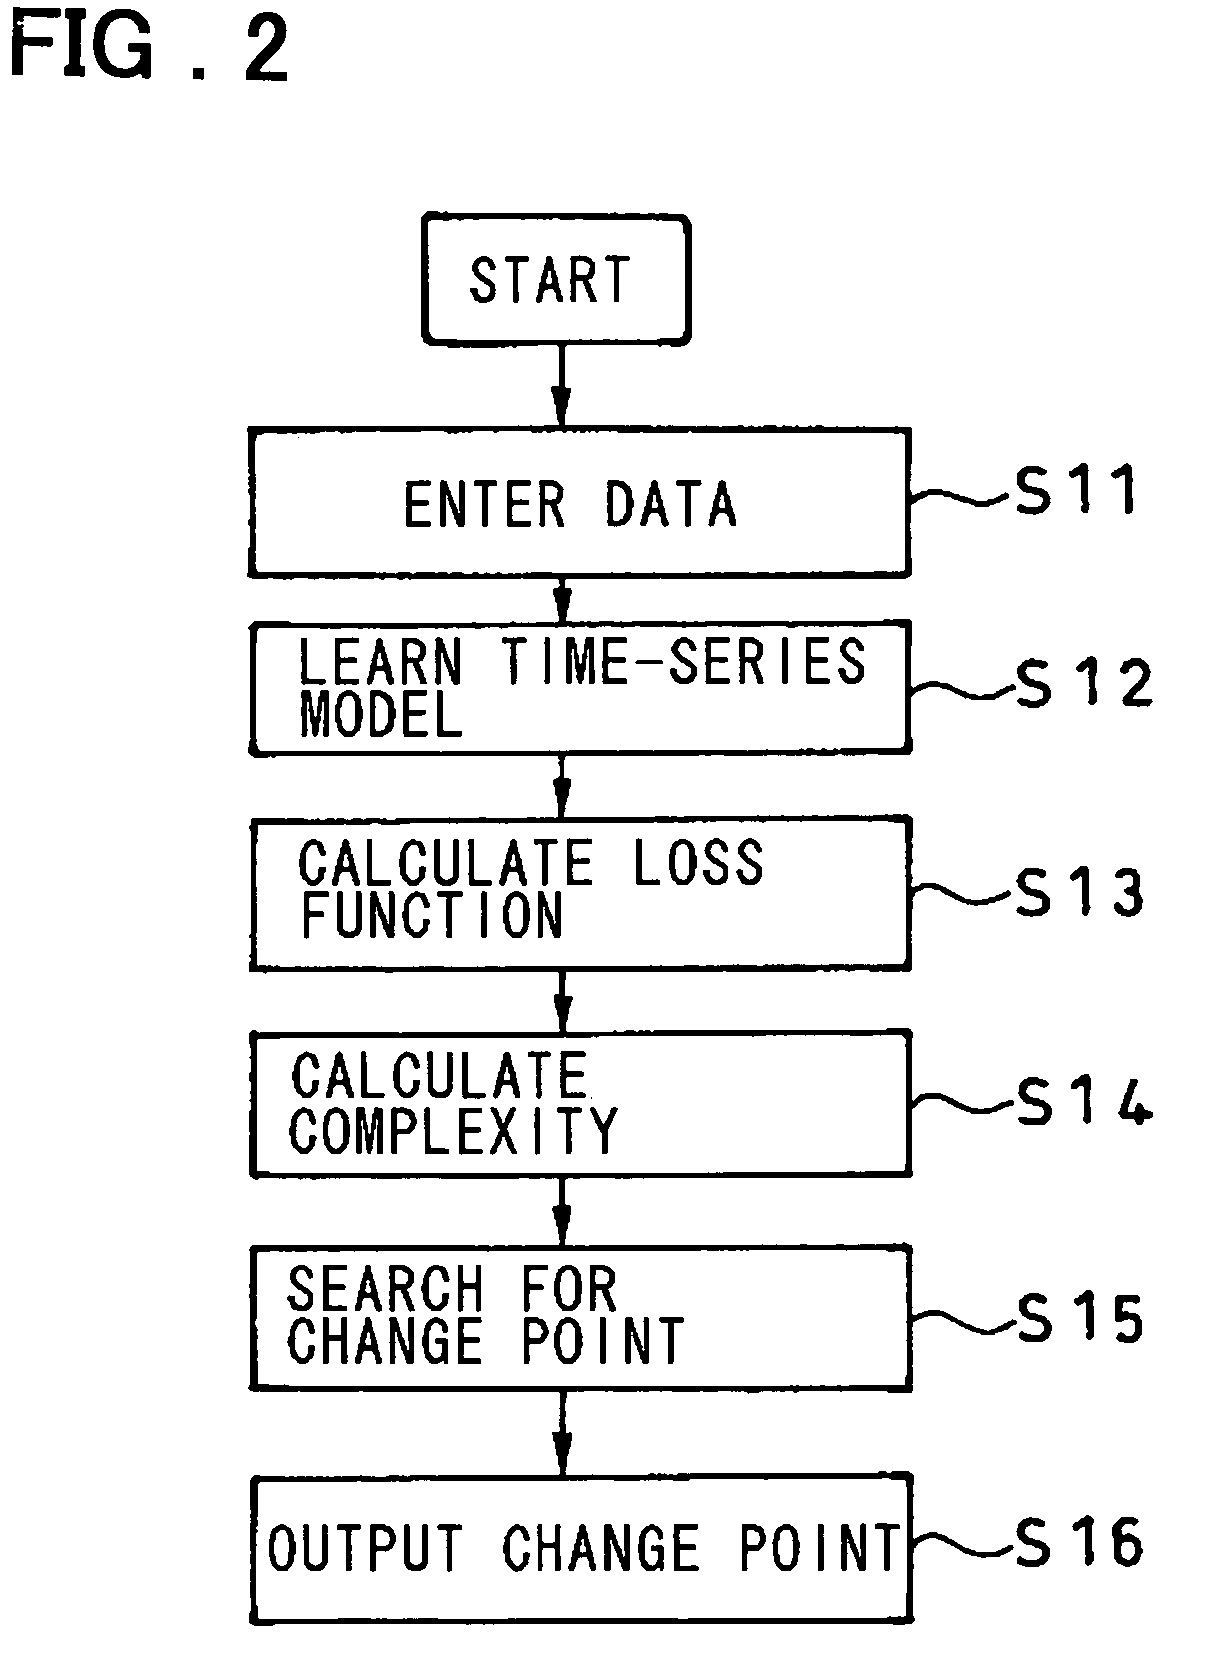 Change-point detection apparatus, method and program therefor